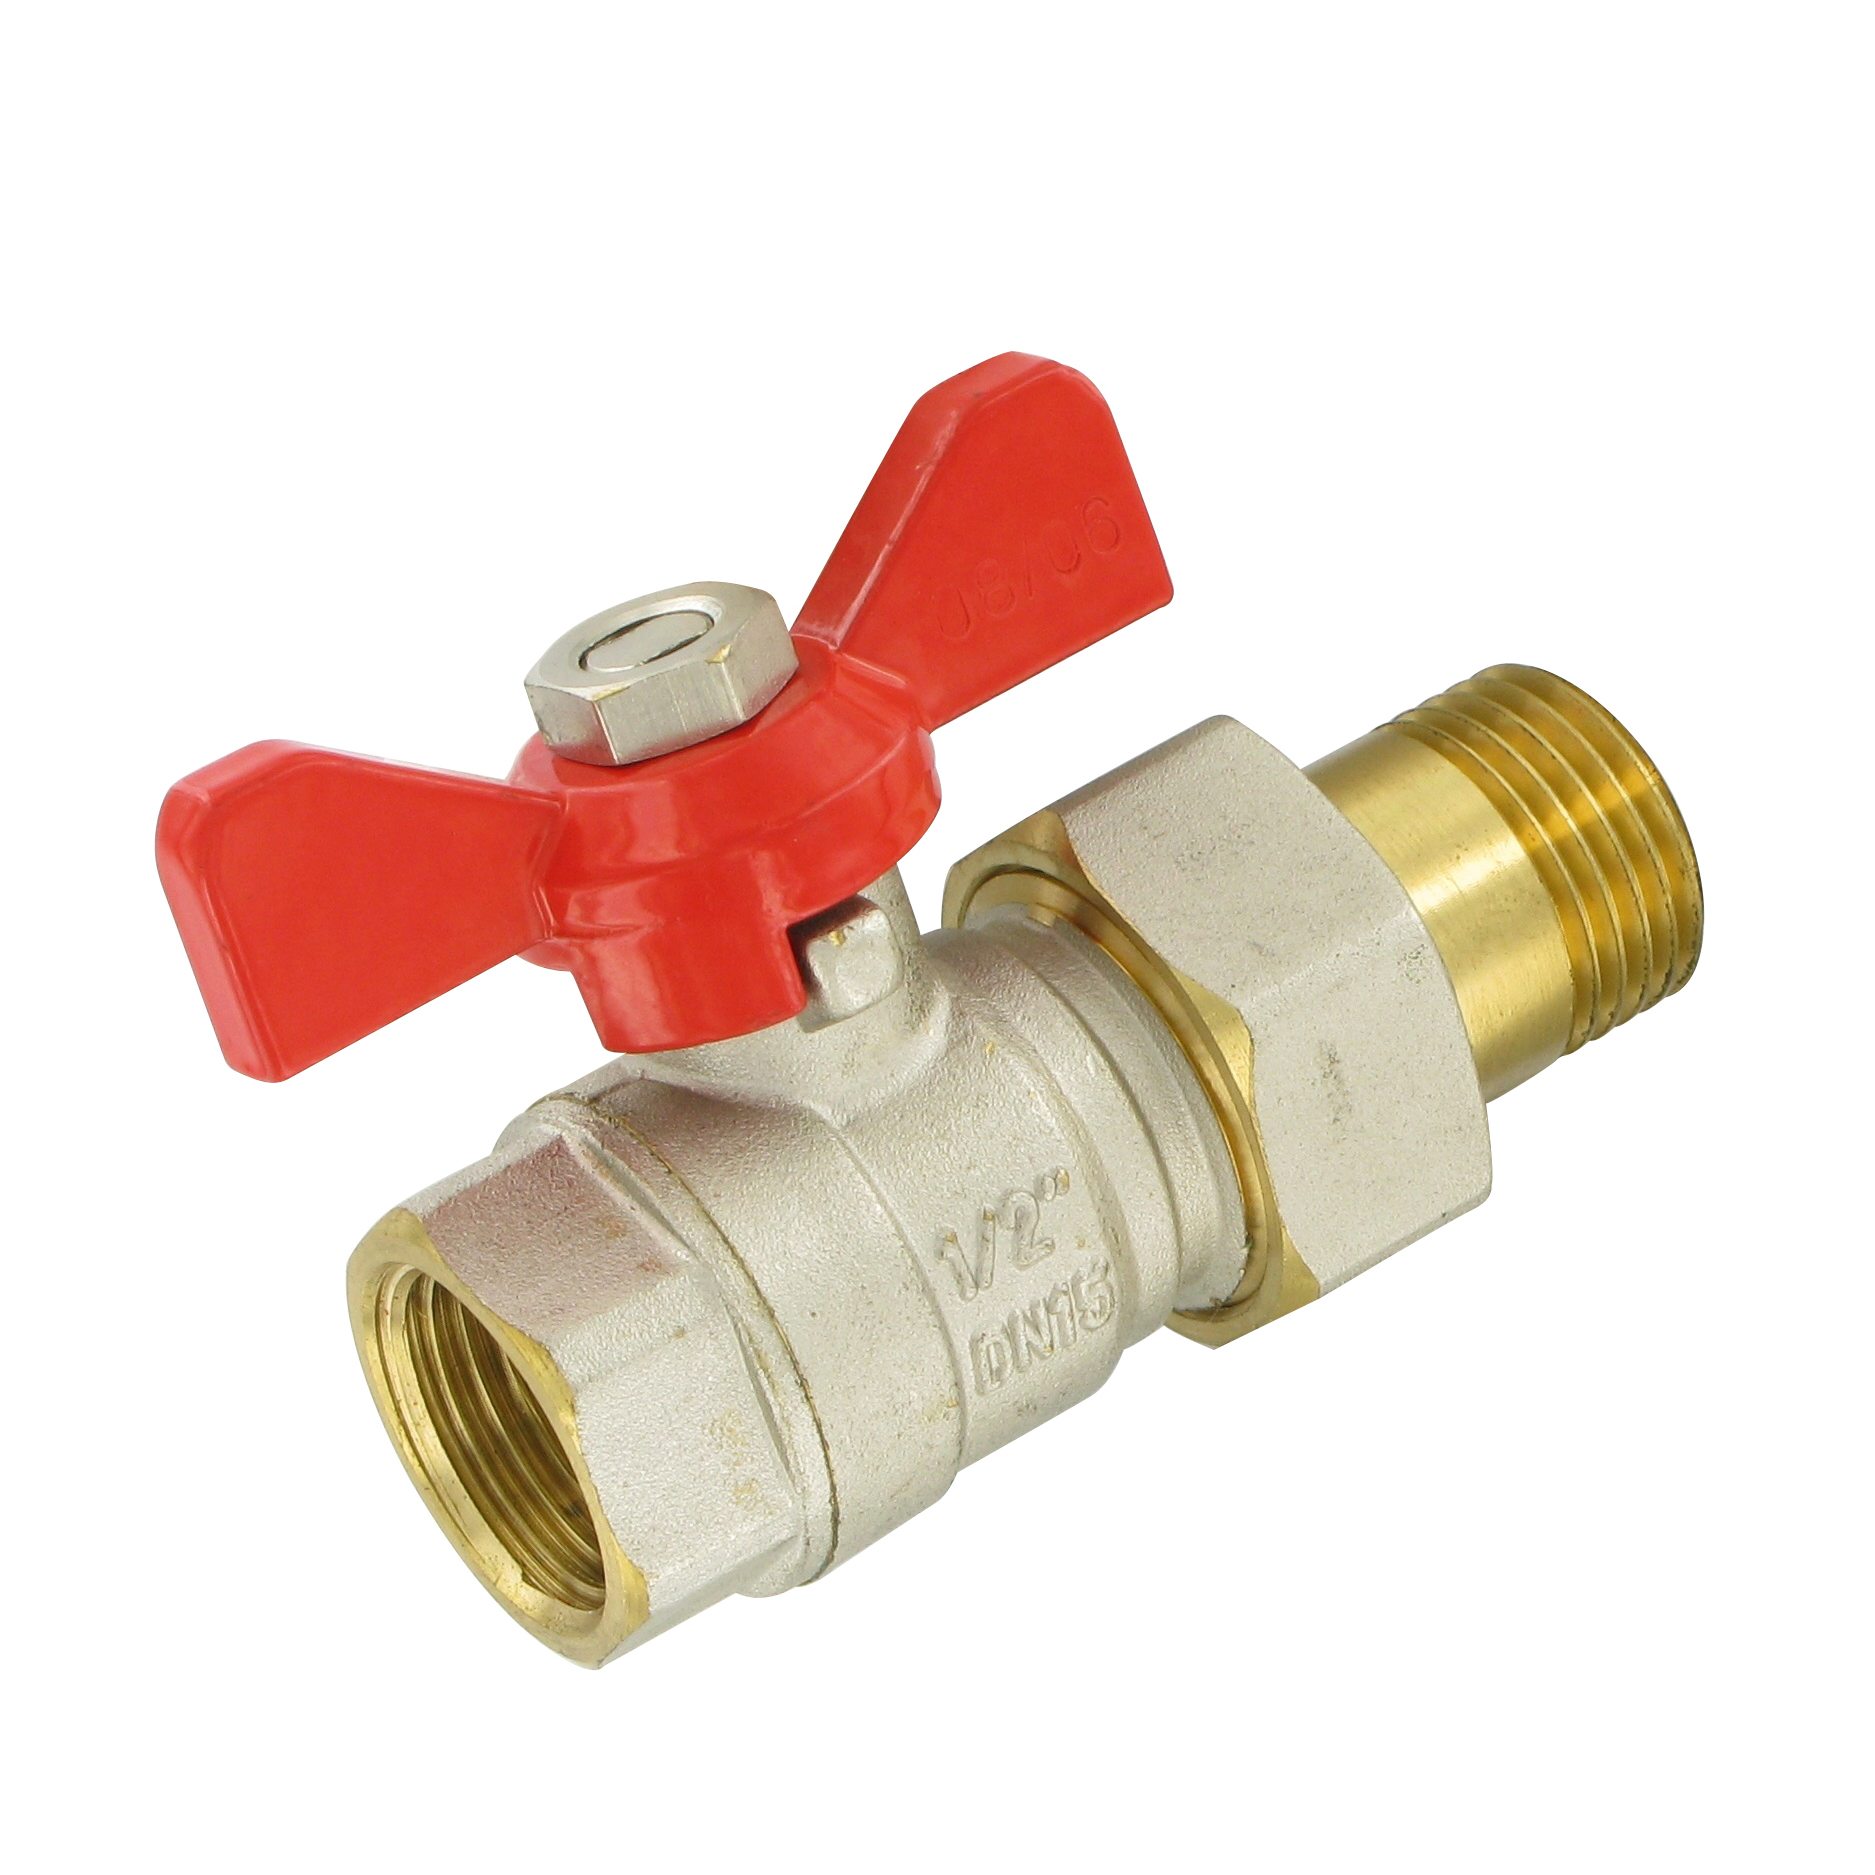 6826 - Ball Valve F-M connection & T handle